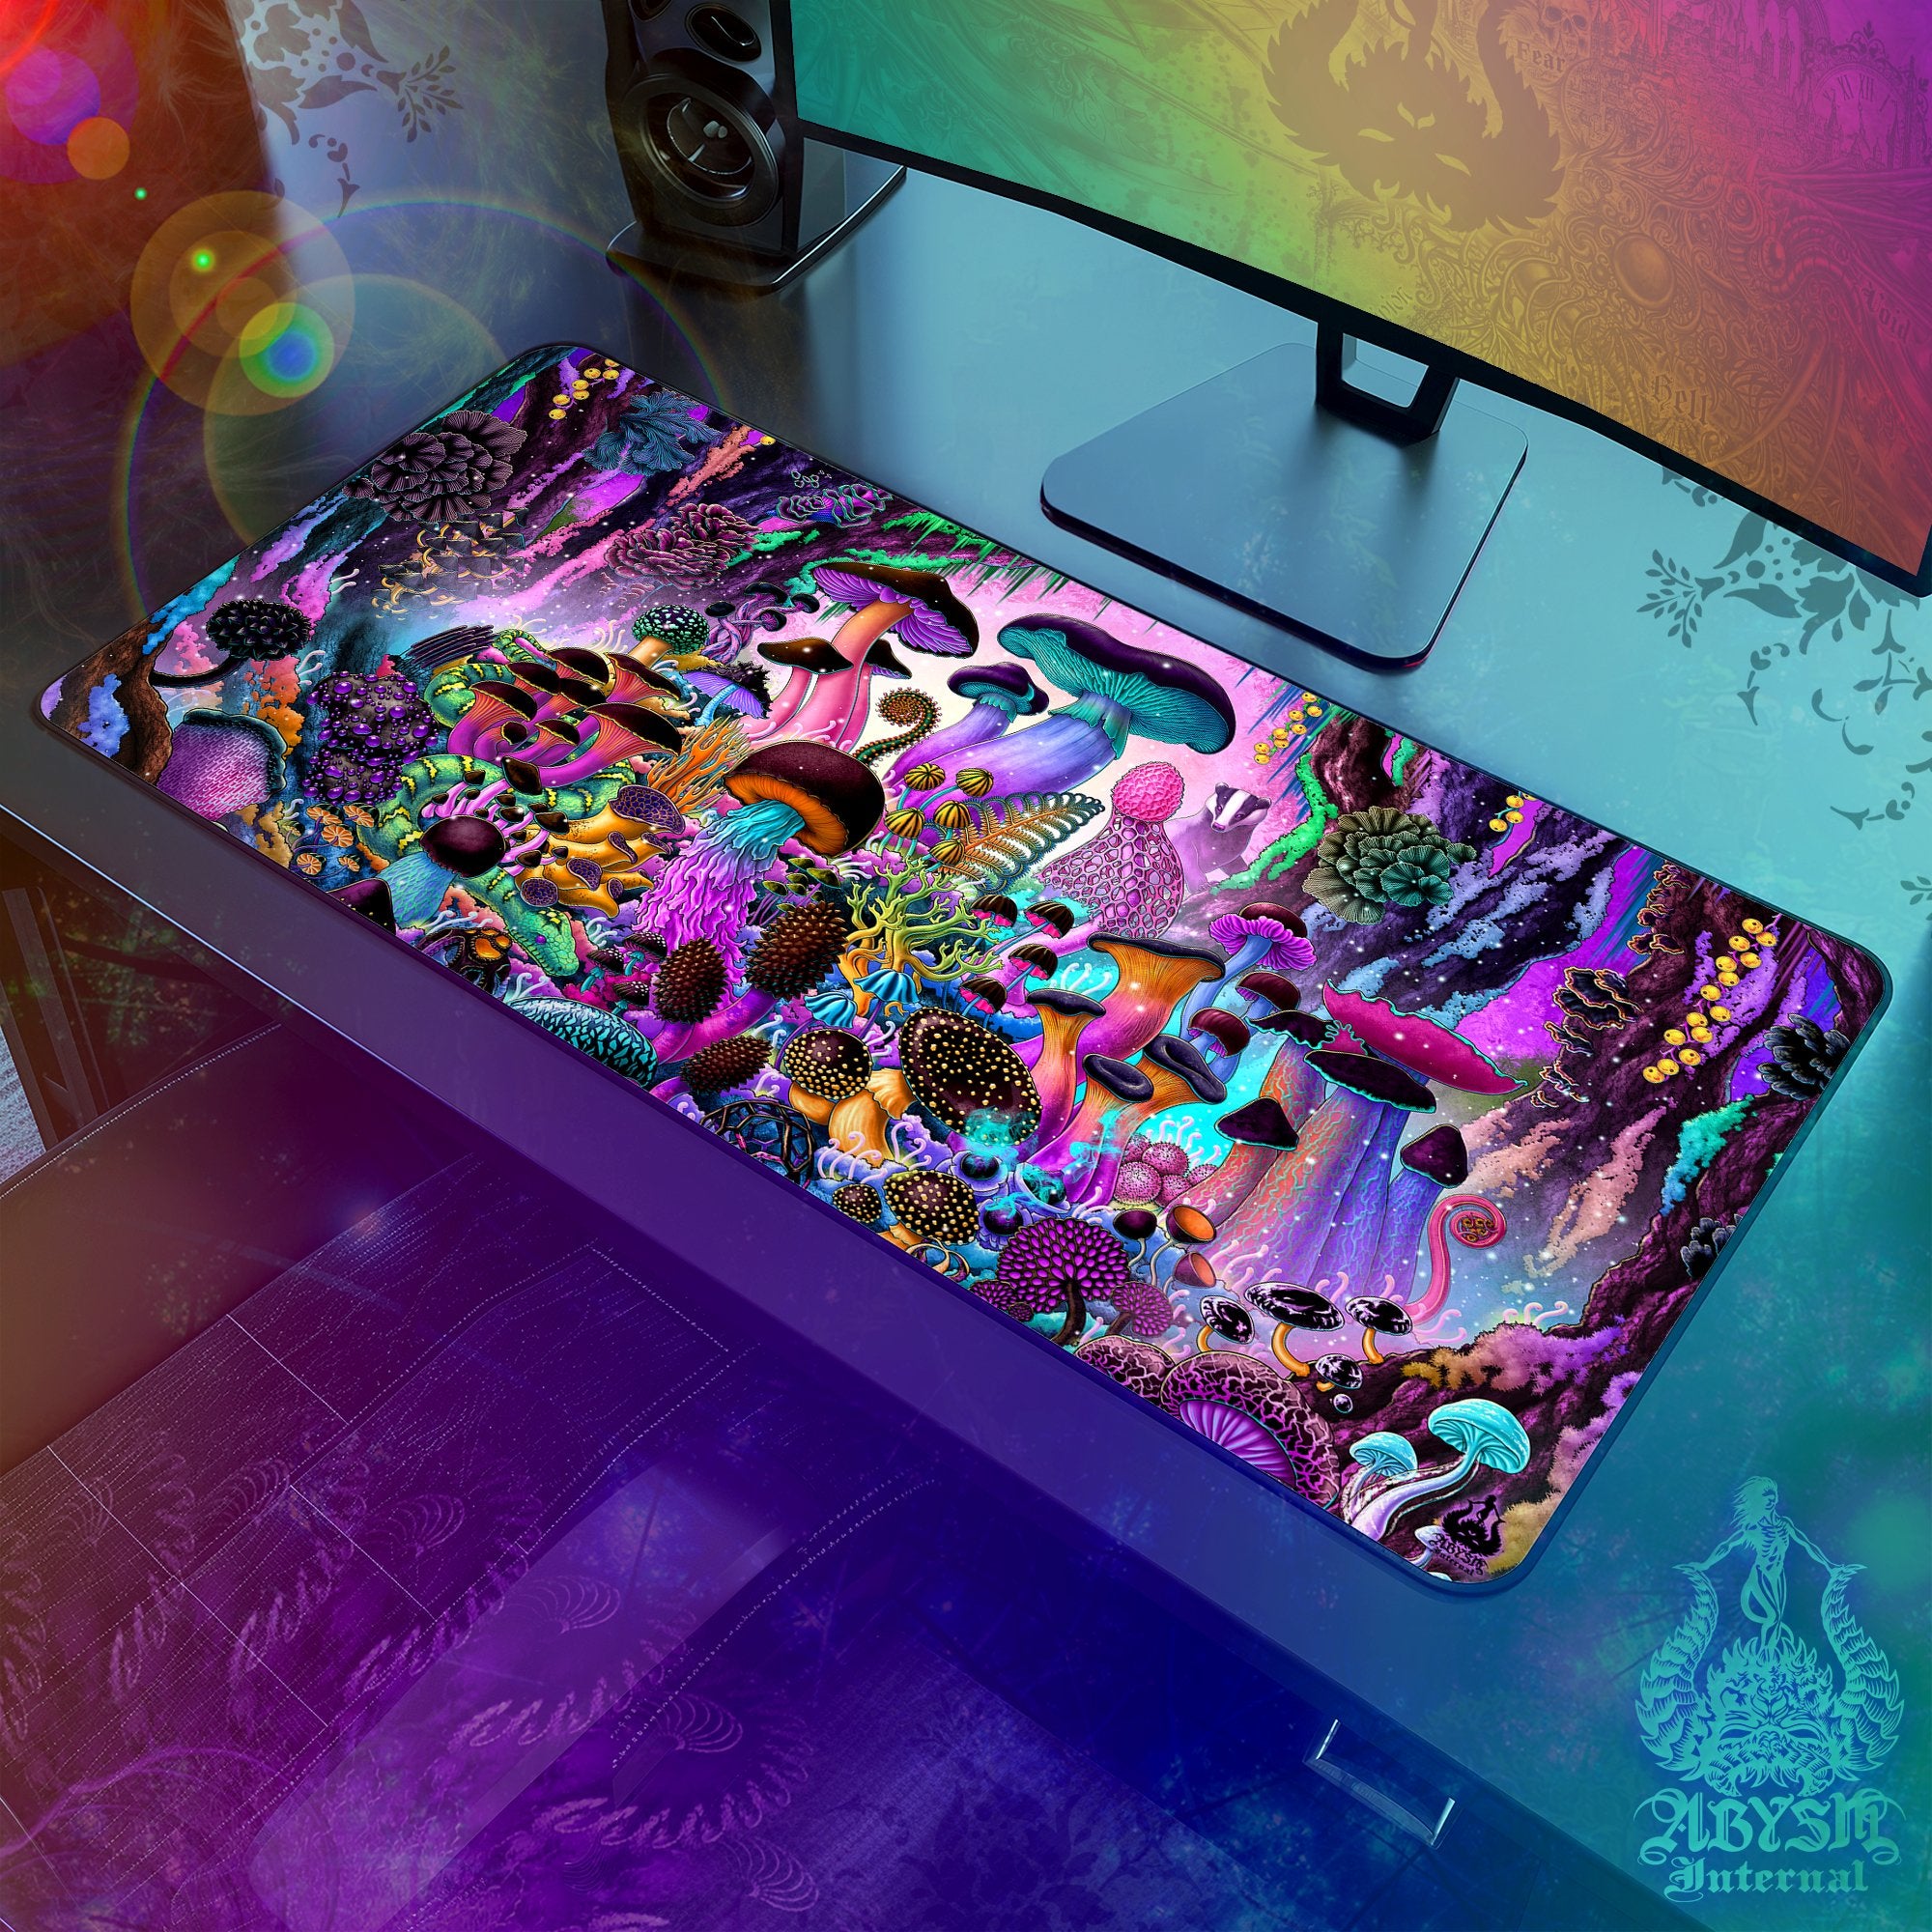 Mushrooms Gaming Mouse Pad, Magic Shrooms Desk Mat, Pastel Black Table Protector Cover, Colorful Workpad - Abysm Internal